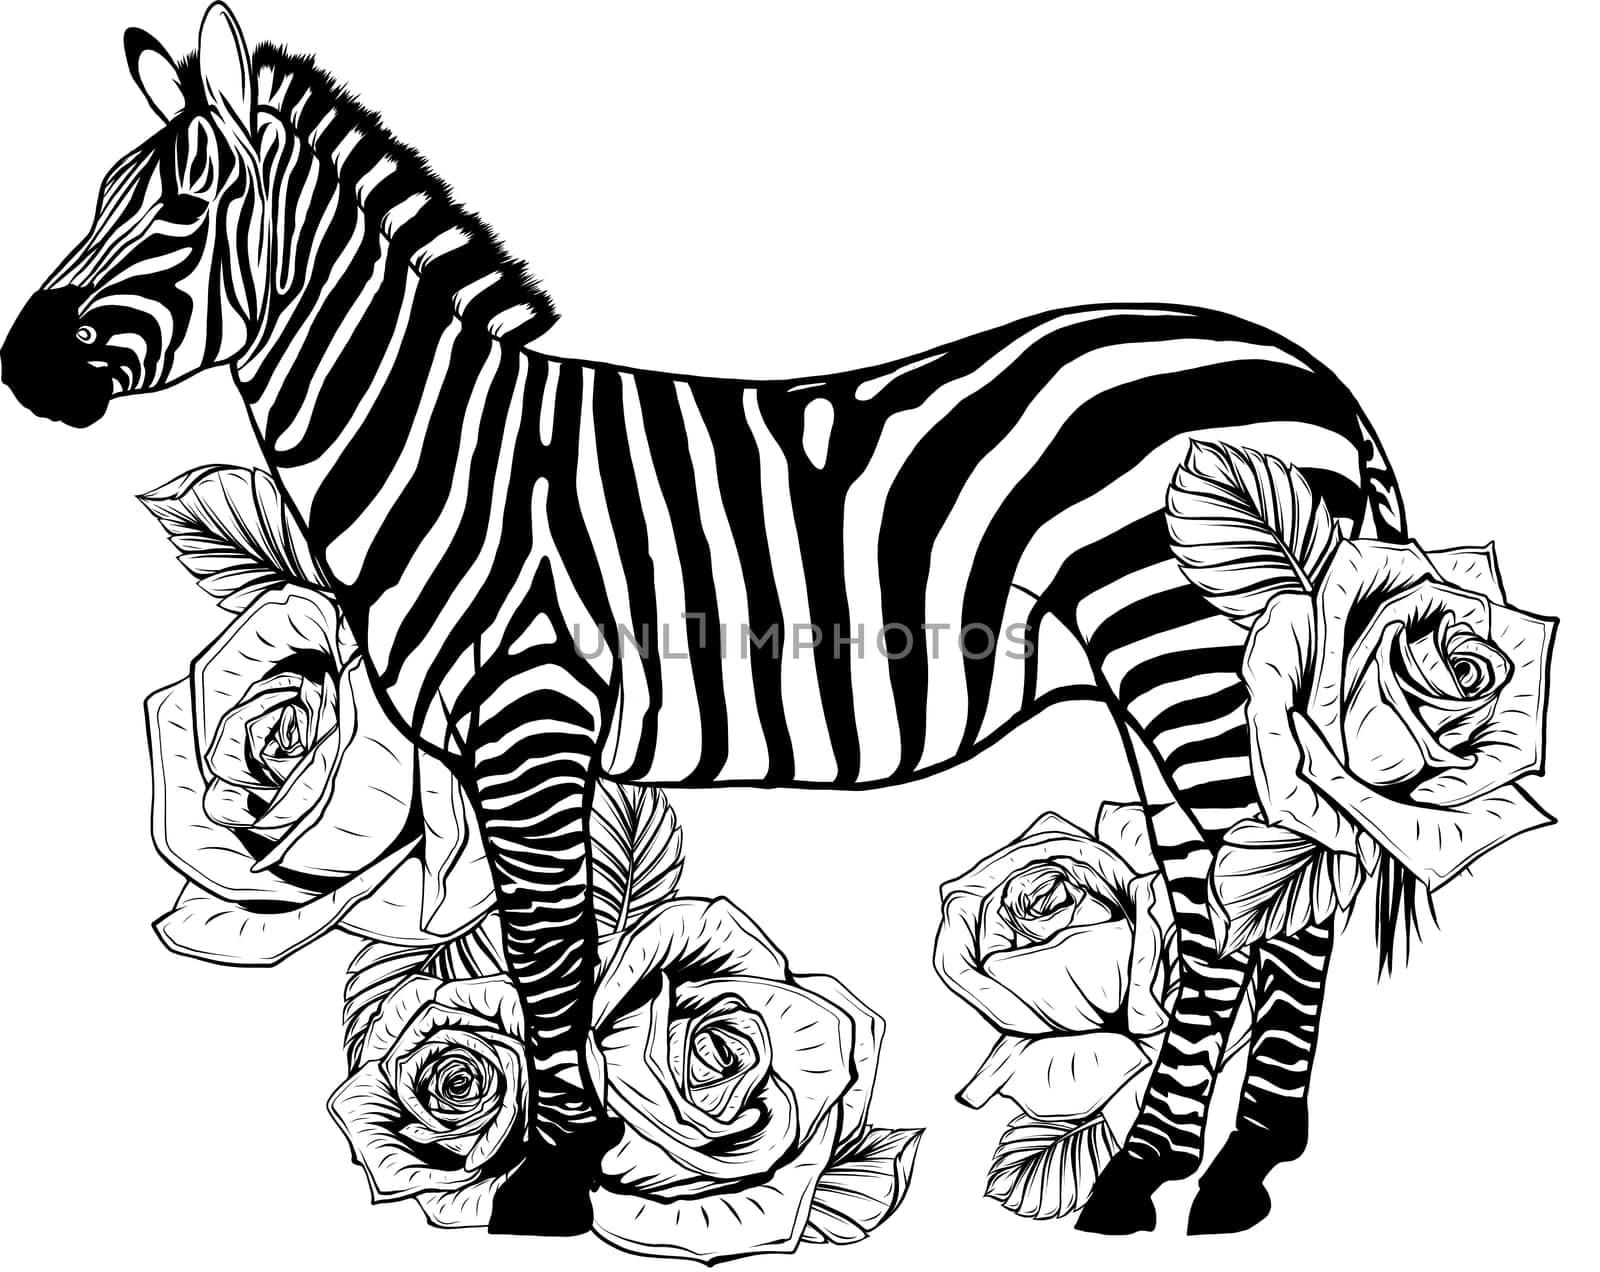 Zebra with rose flower hand drawn illustration by dean